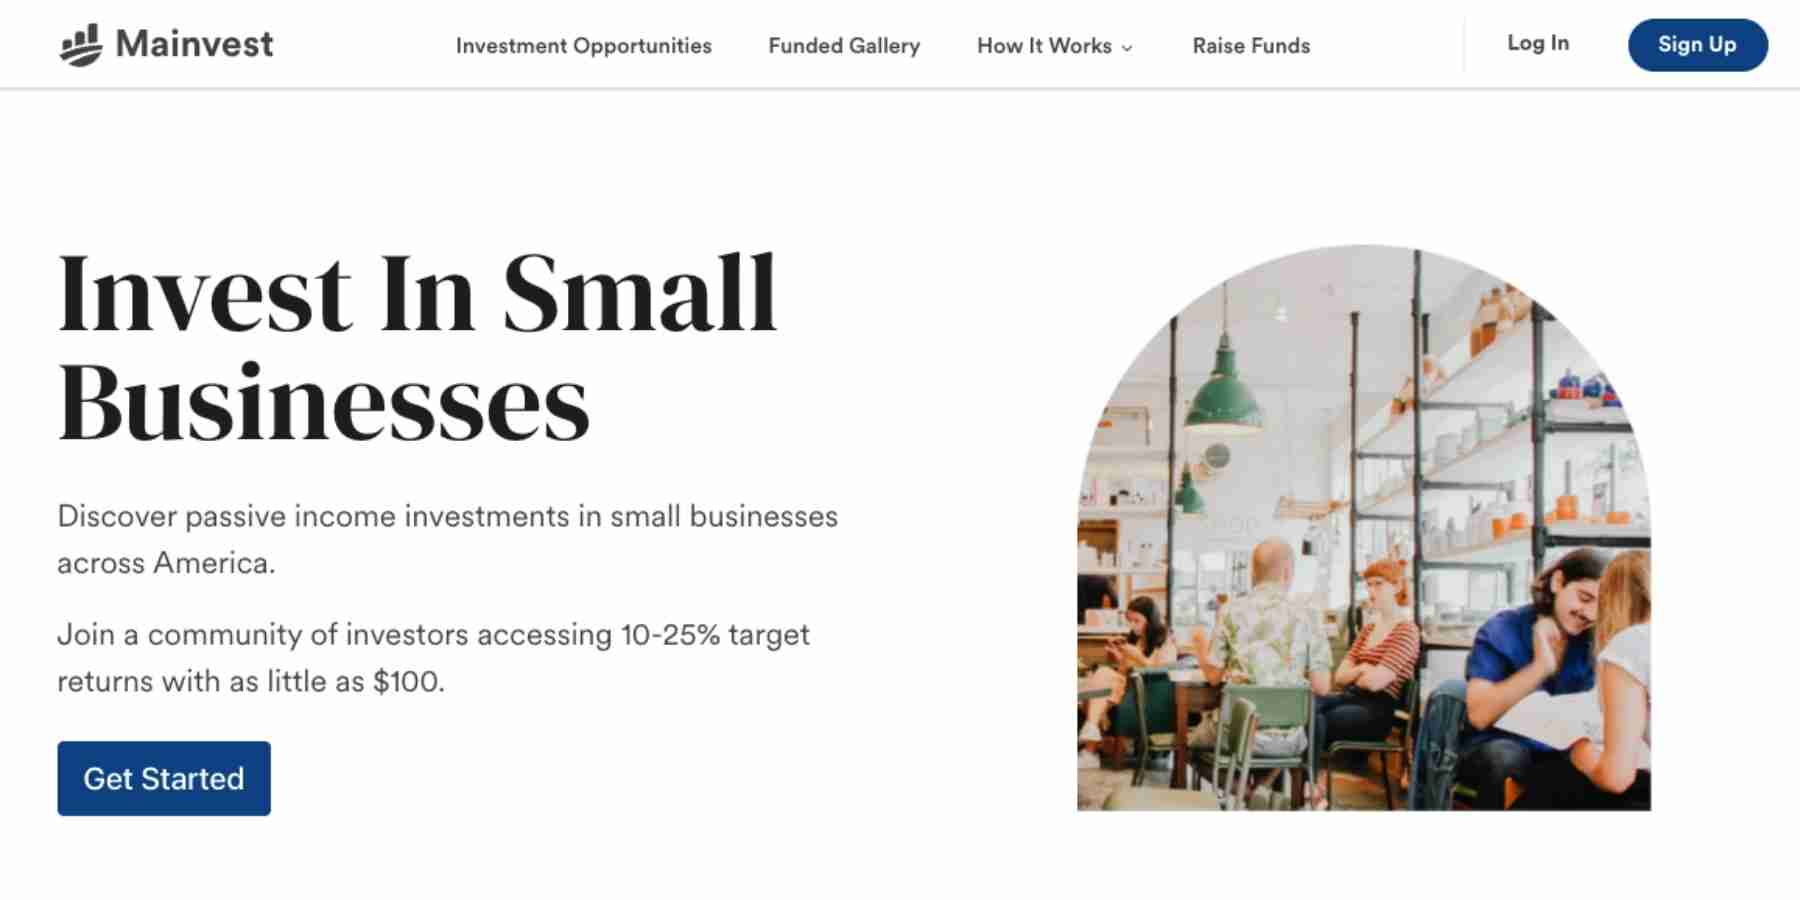 Invest in Small Businesses with Mainvest